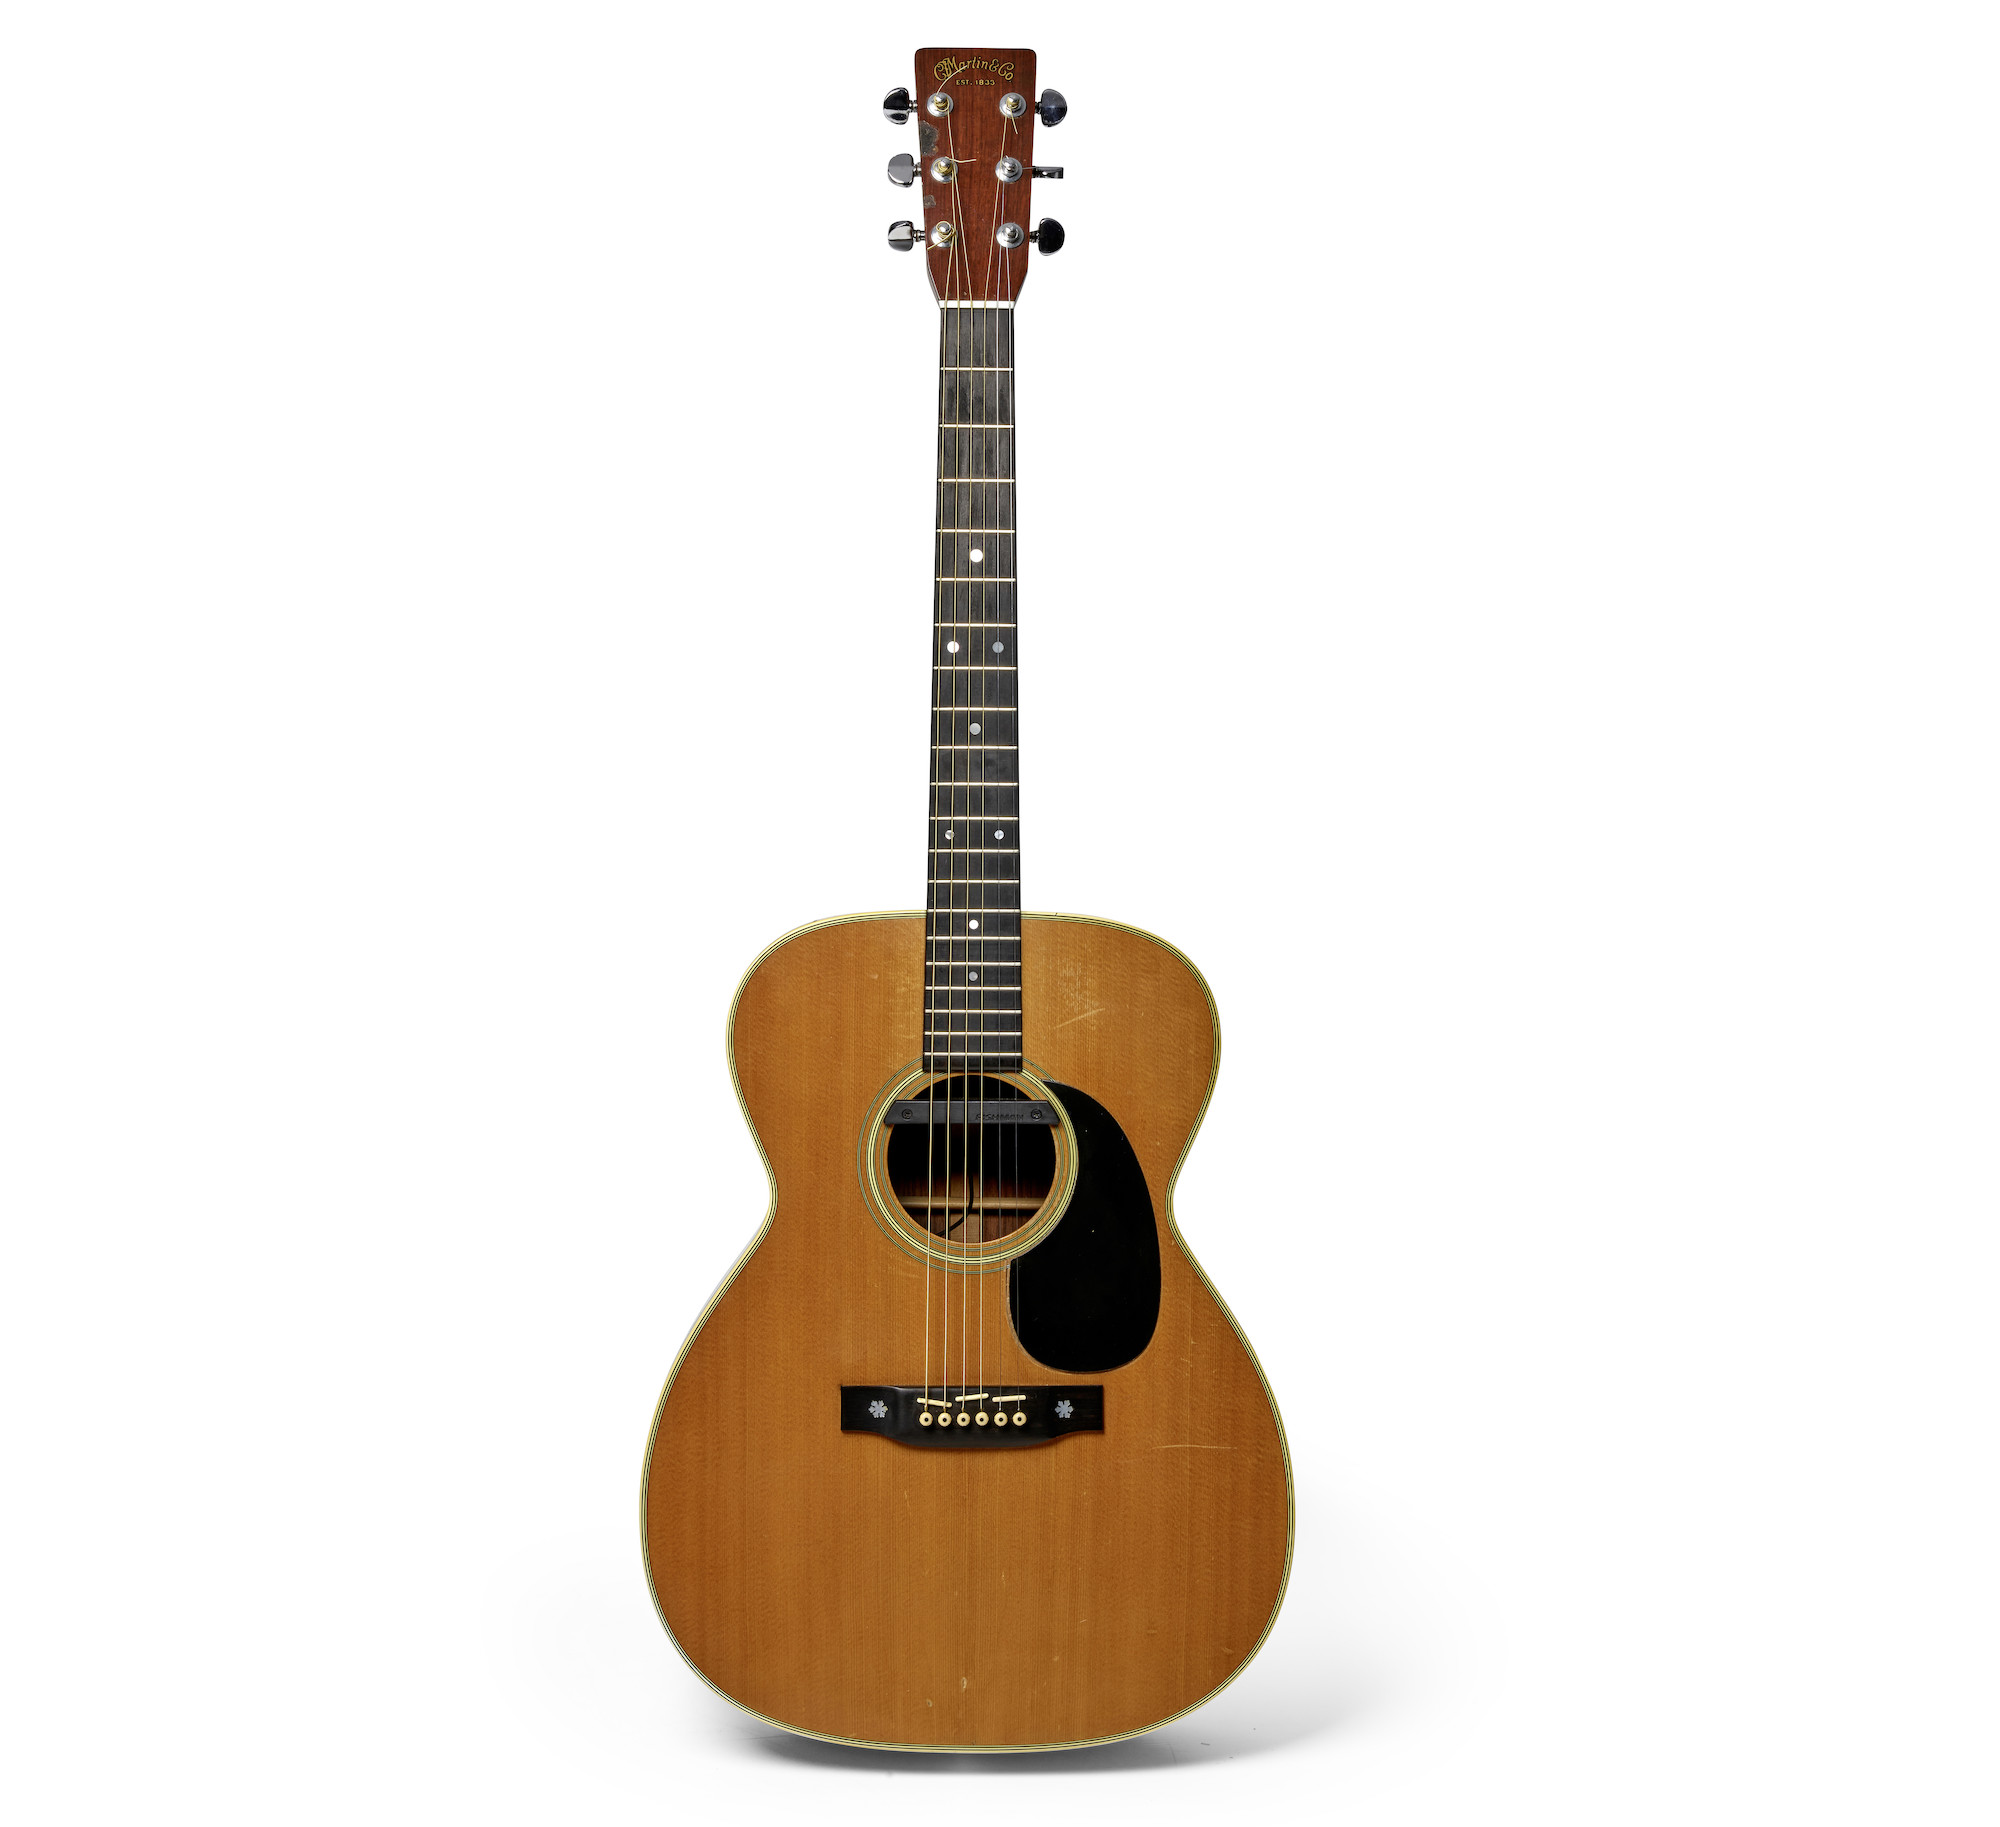 Eric Clapton's Martin acoustic guitar from 1974